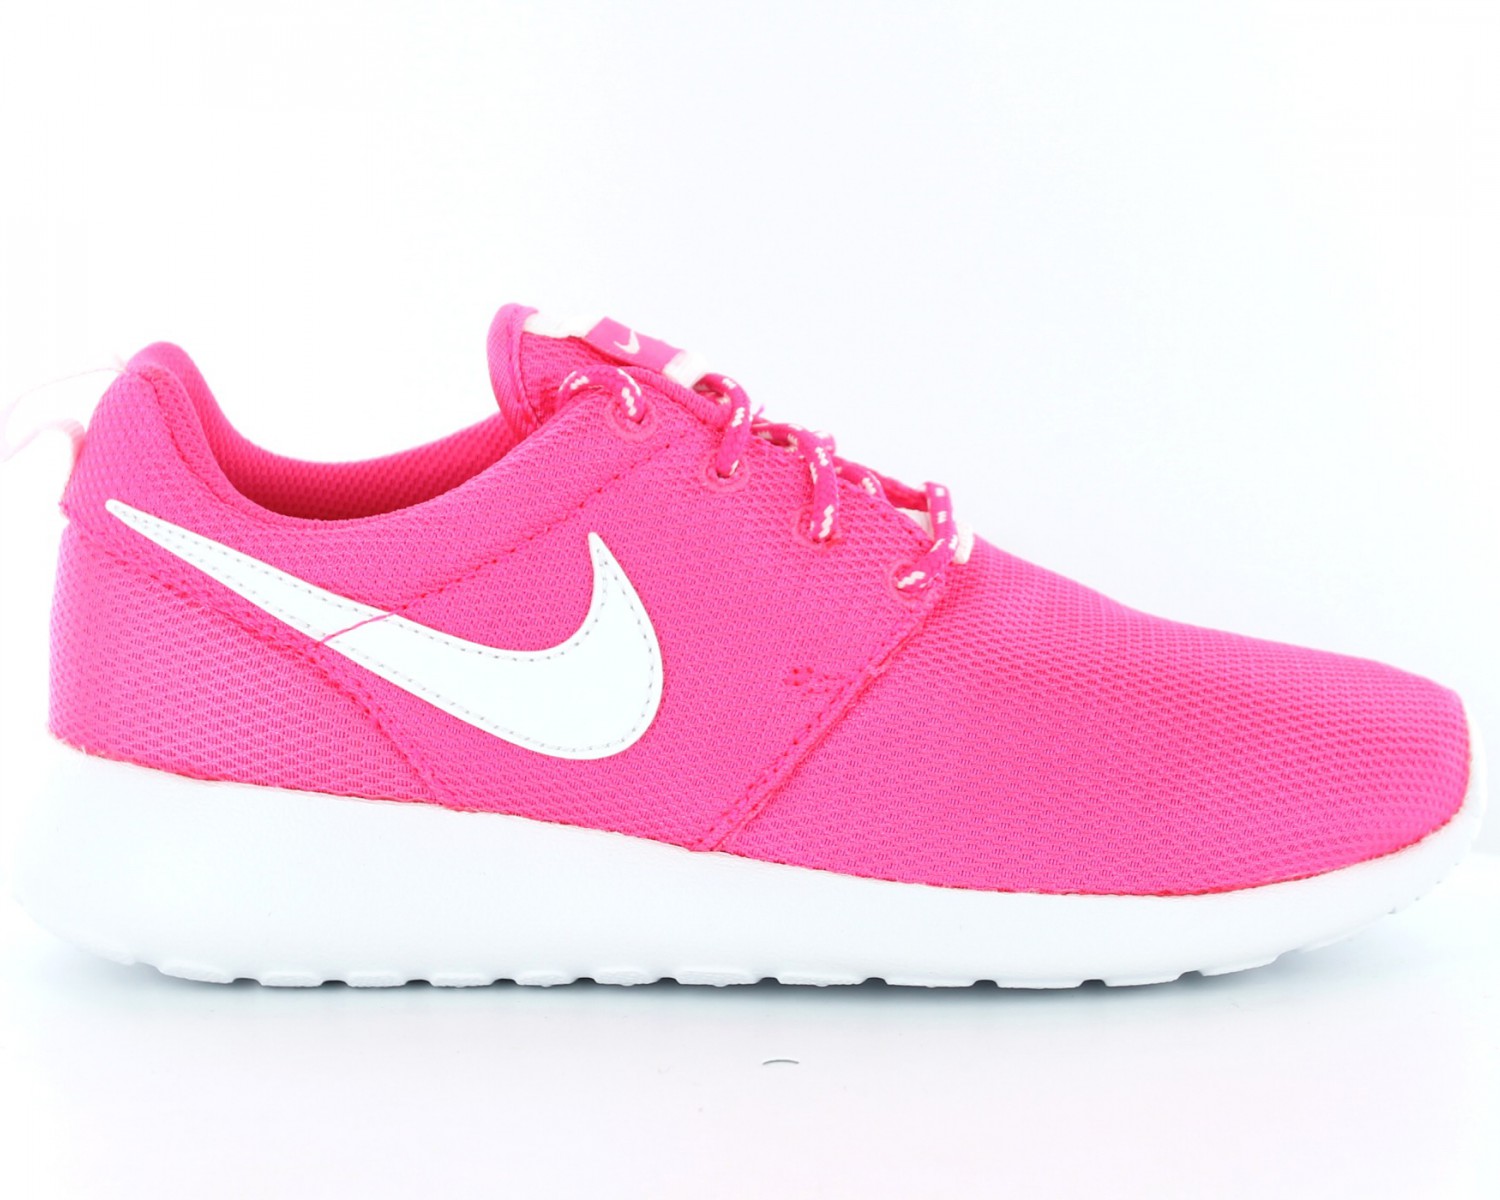 Basket Nike 115960 Rose 39 - NIKE - 115960 - Textile - Rose - Femme -  Adulte - Lacets Rose - Cdiscount Chaussures